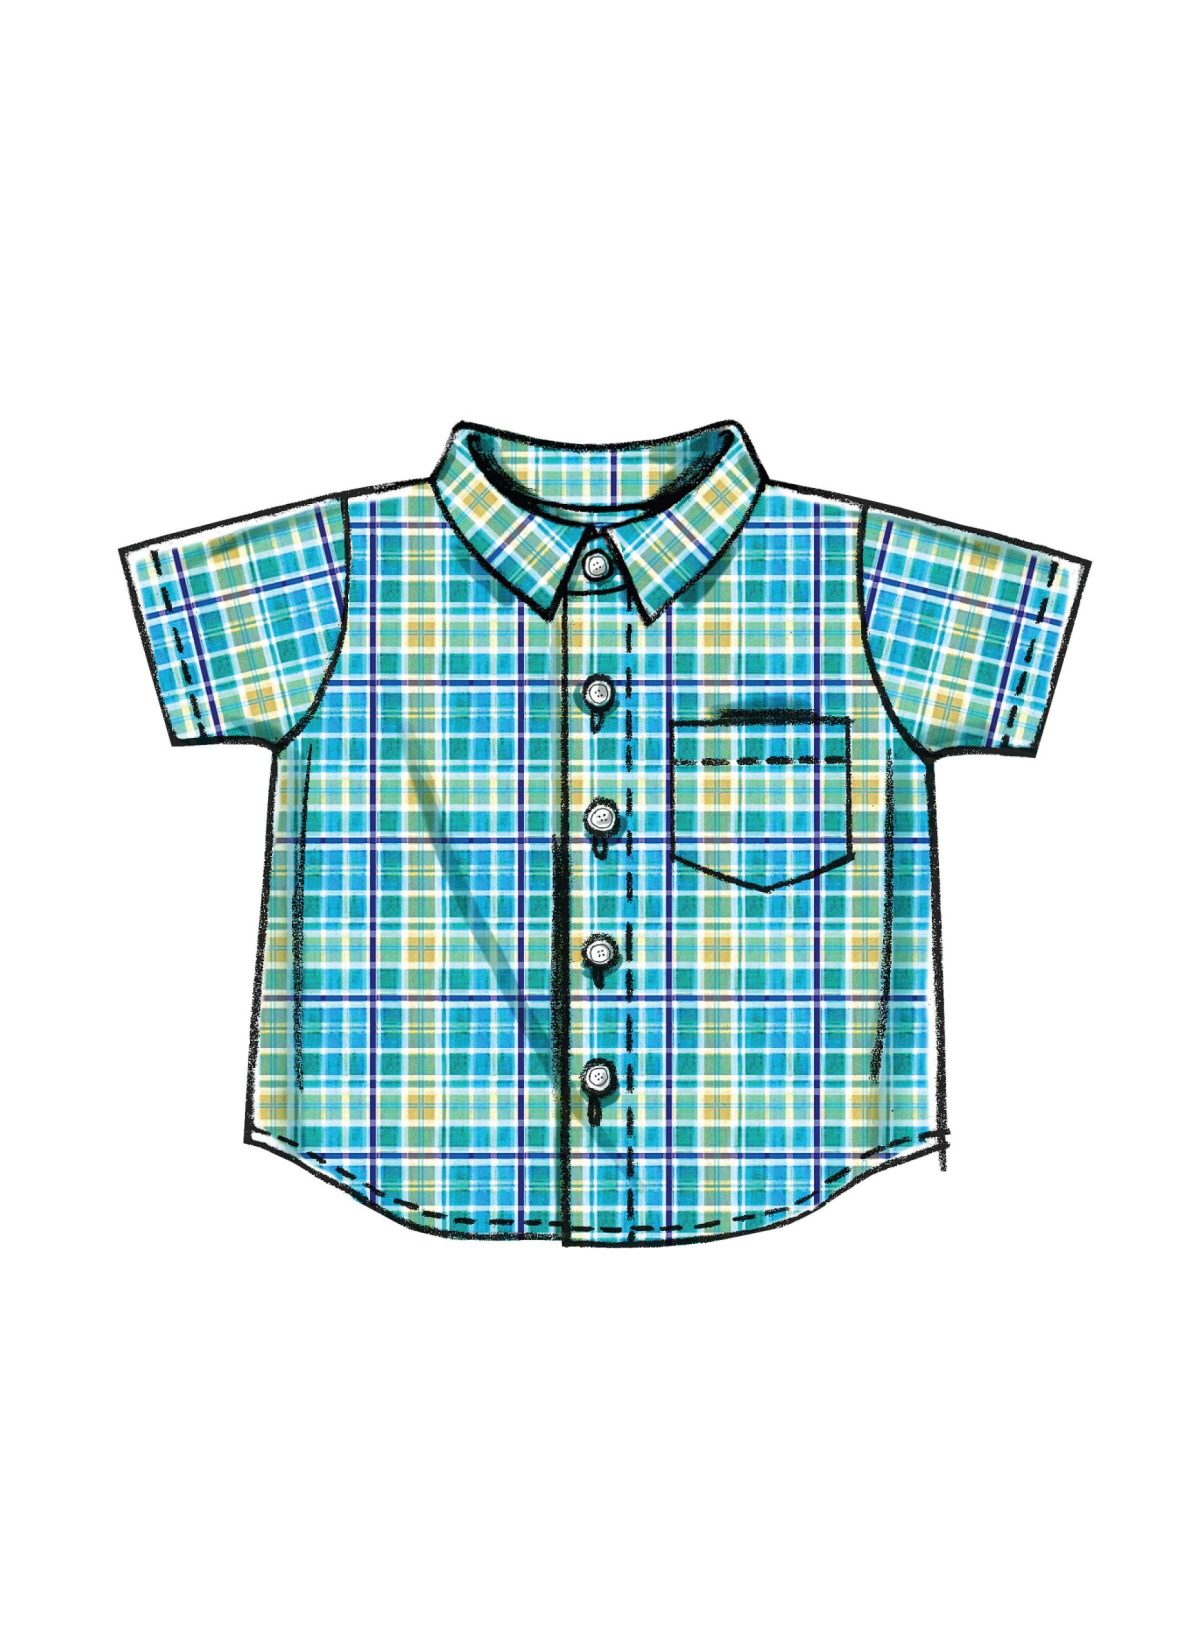 McCall's Sewing Pattern M6016 Infants' Shirts, Shorts And Pants